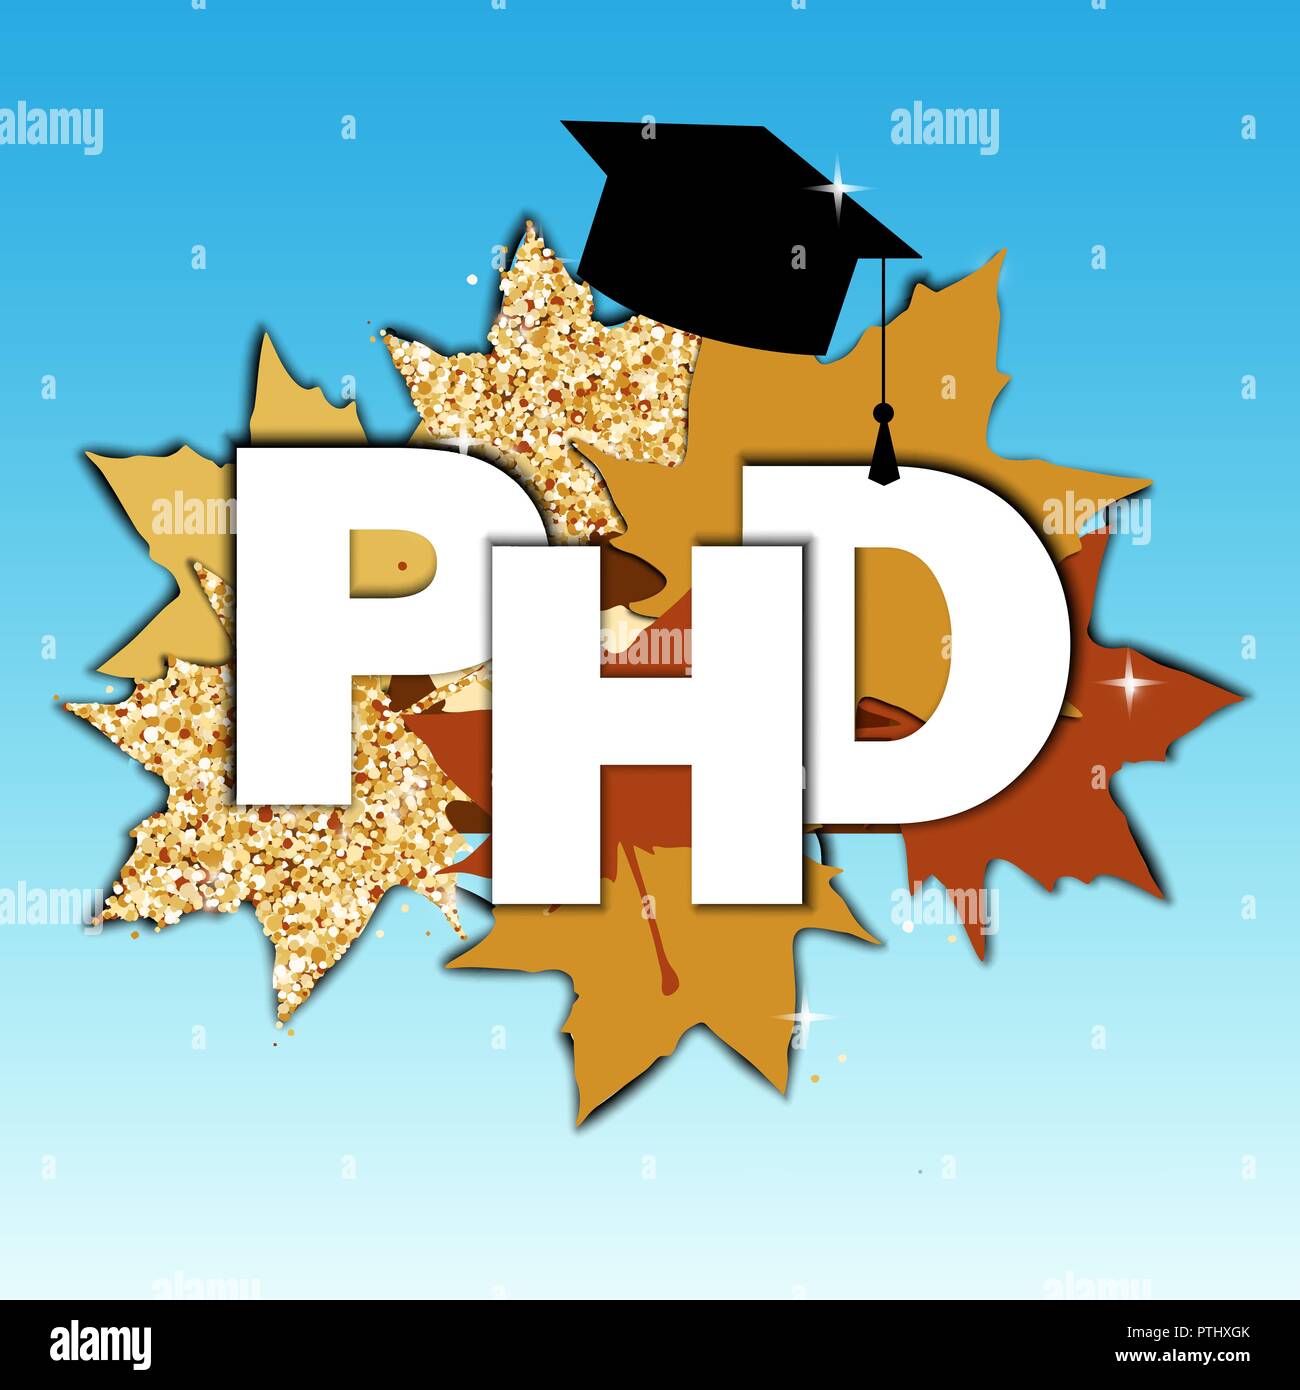 Doctor of Philosophy degree concept. PHD text, graduate hat, and maple leaves composition. Vector illustration Stock Vector